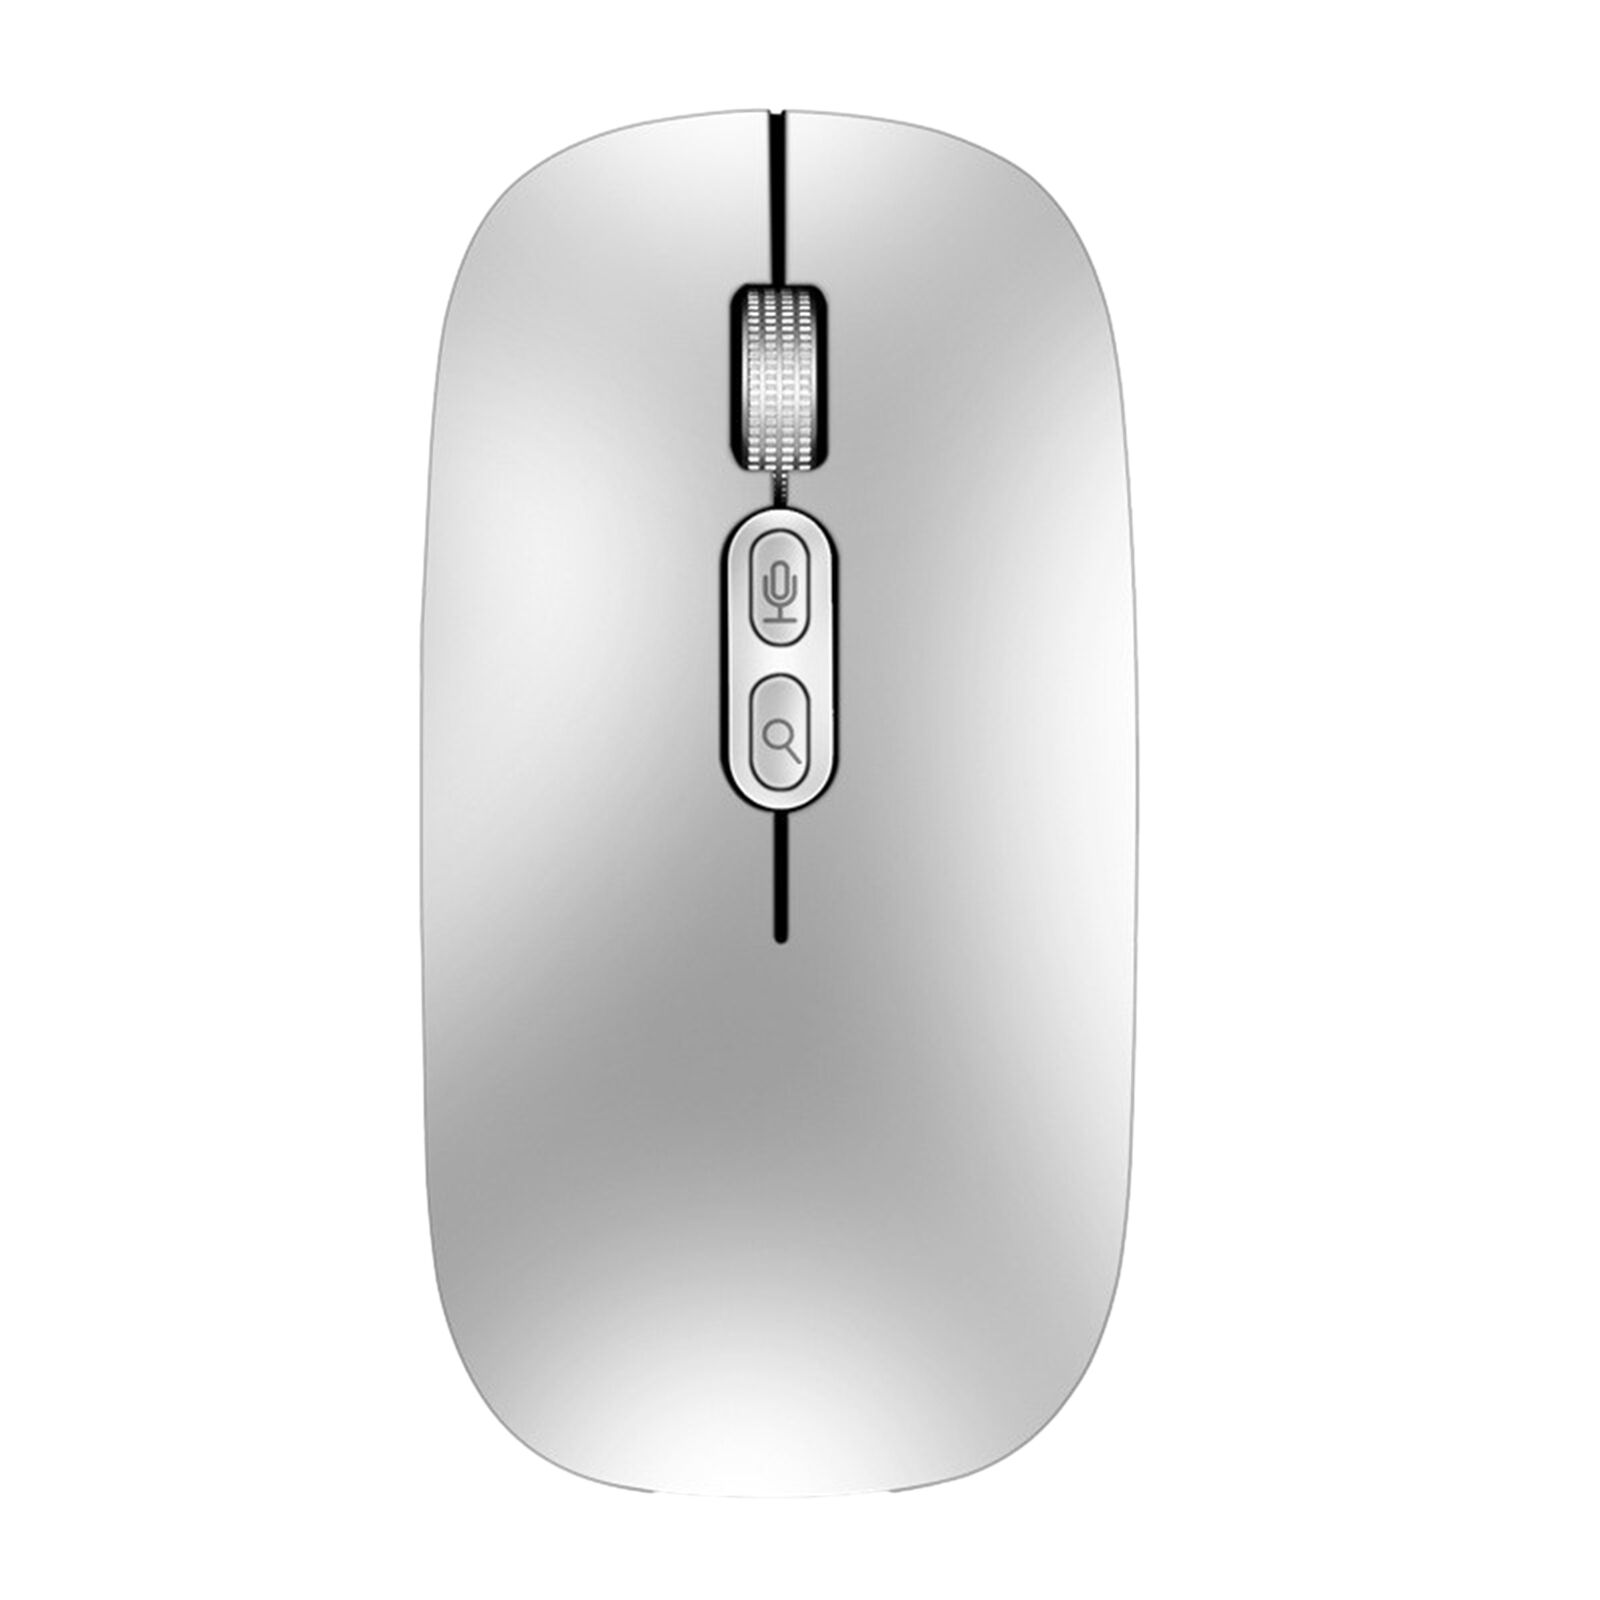 Wireless Rechargeable Mouse 2.4G Wireless Ergonomic AI Voice Mouse